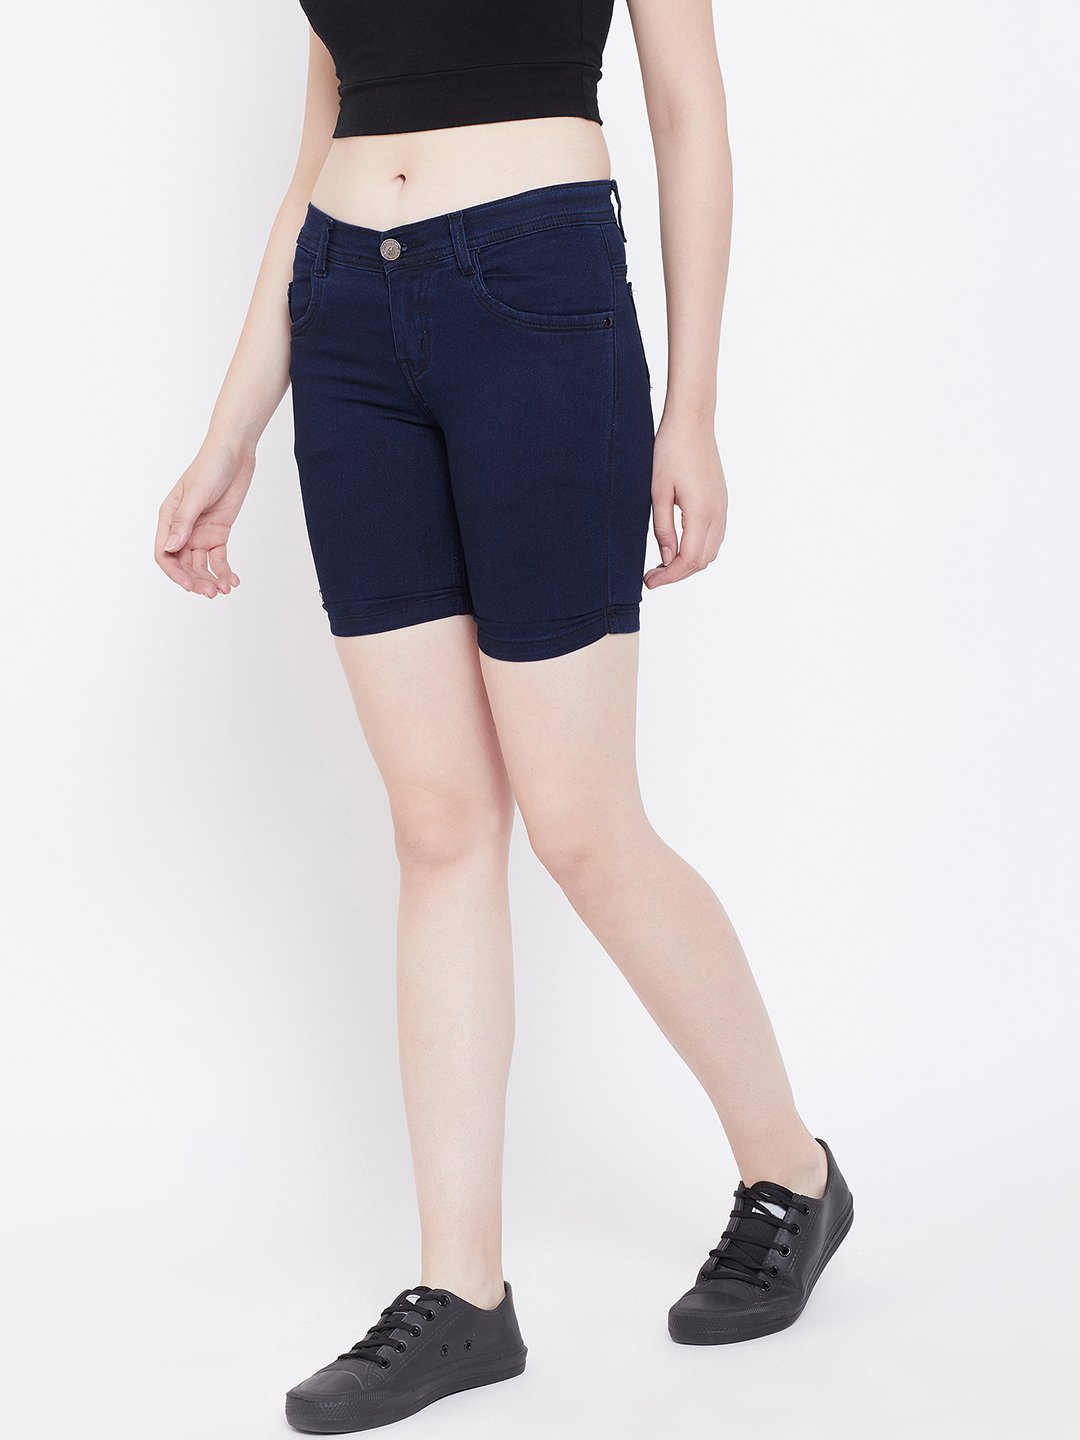 Slim Fit Stretchable Blue Shorts - NiftyJeans